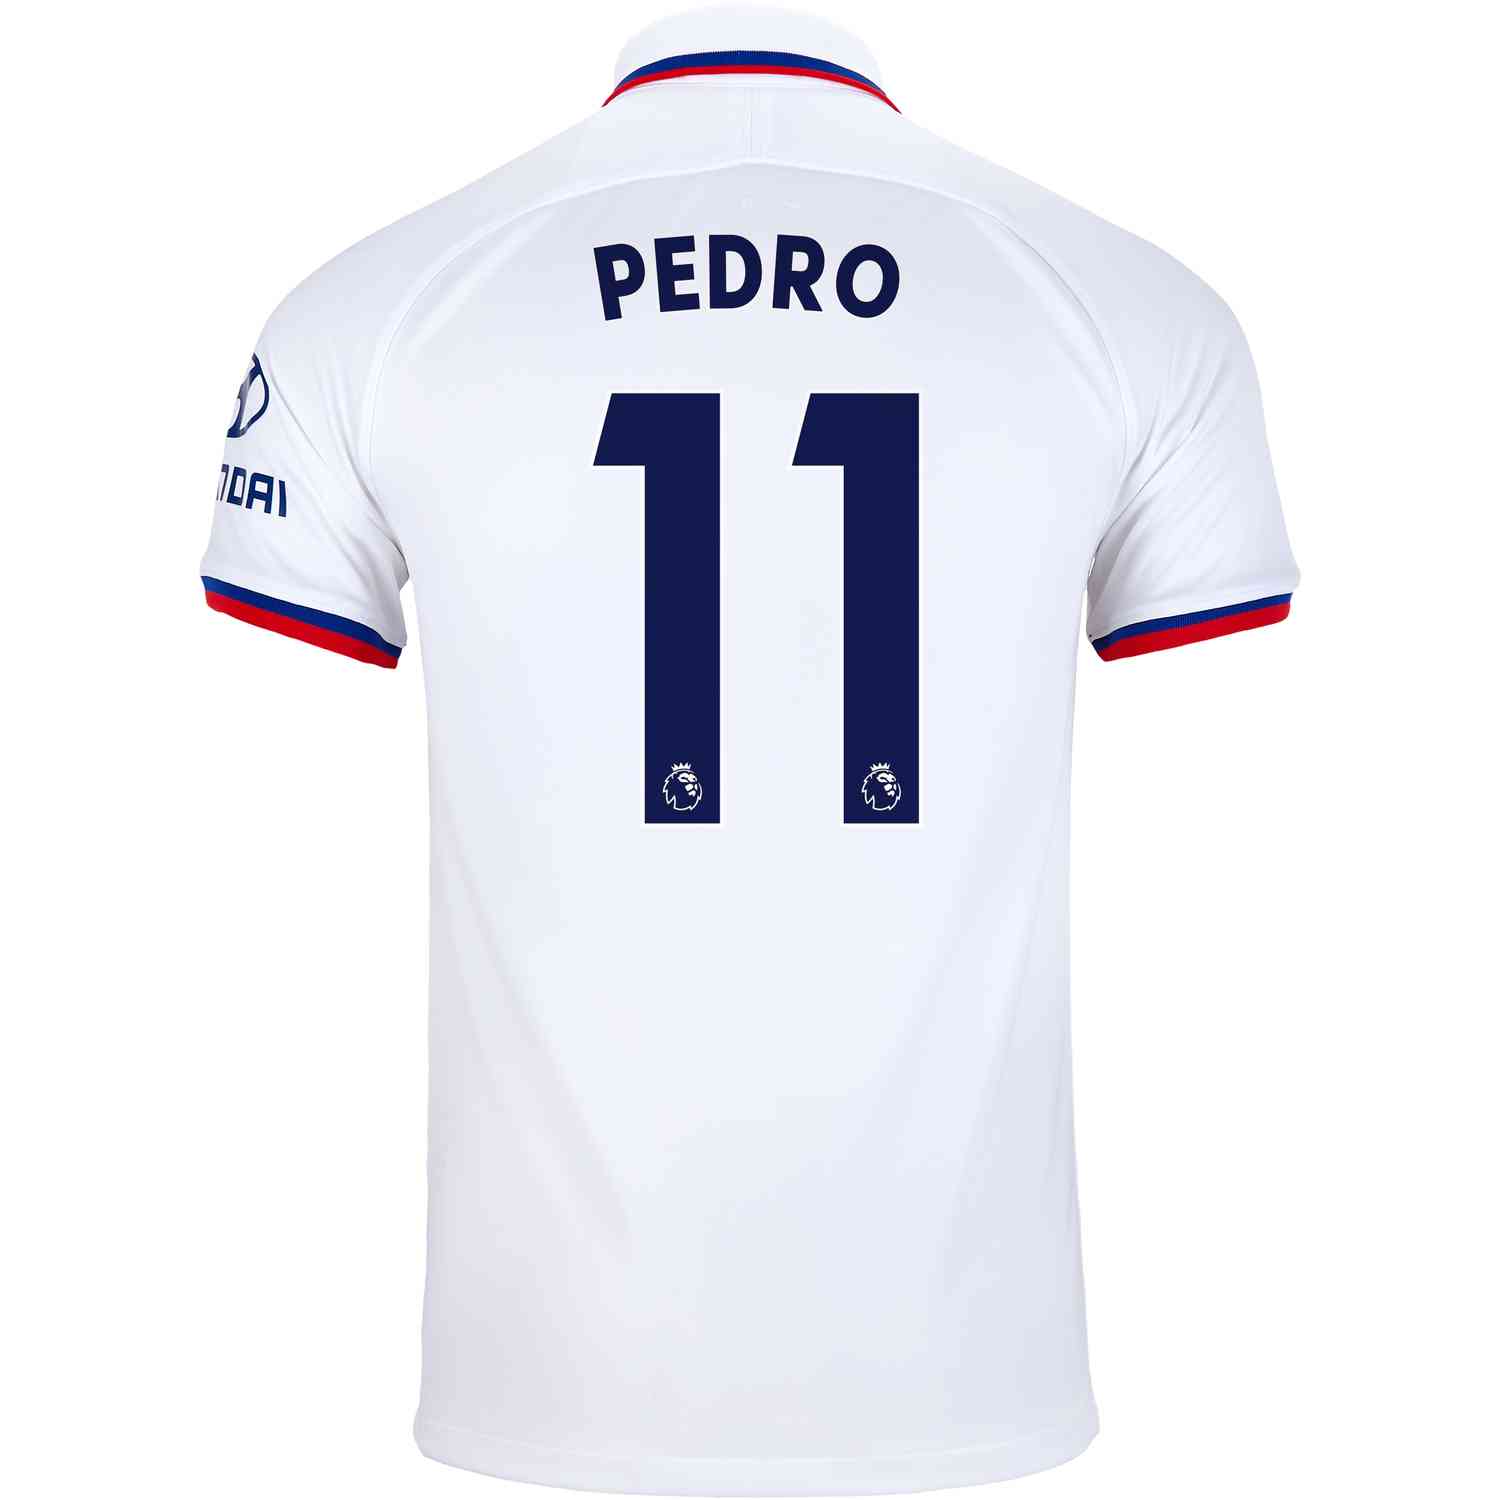 pedro jersey number